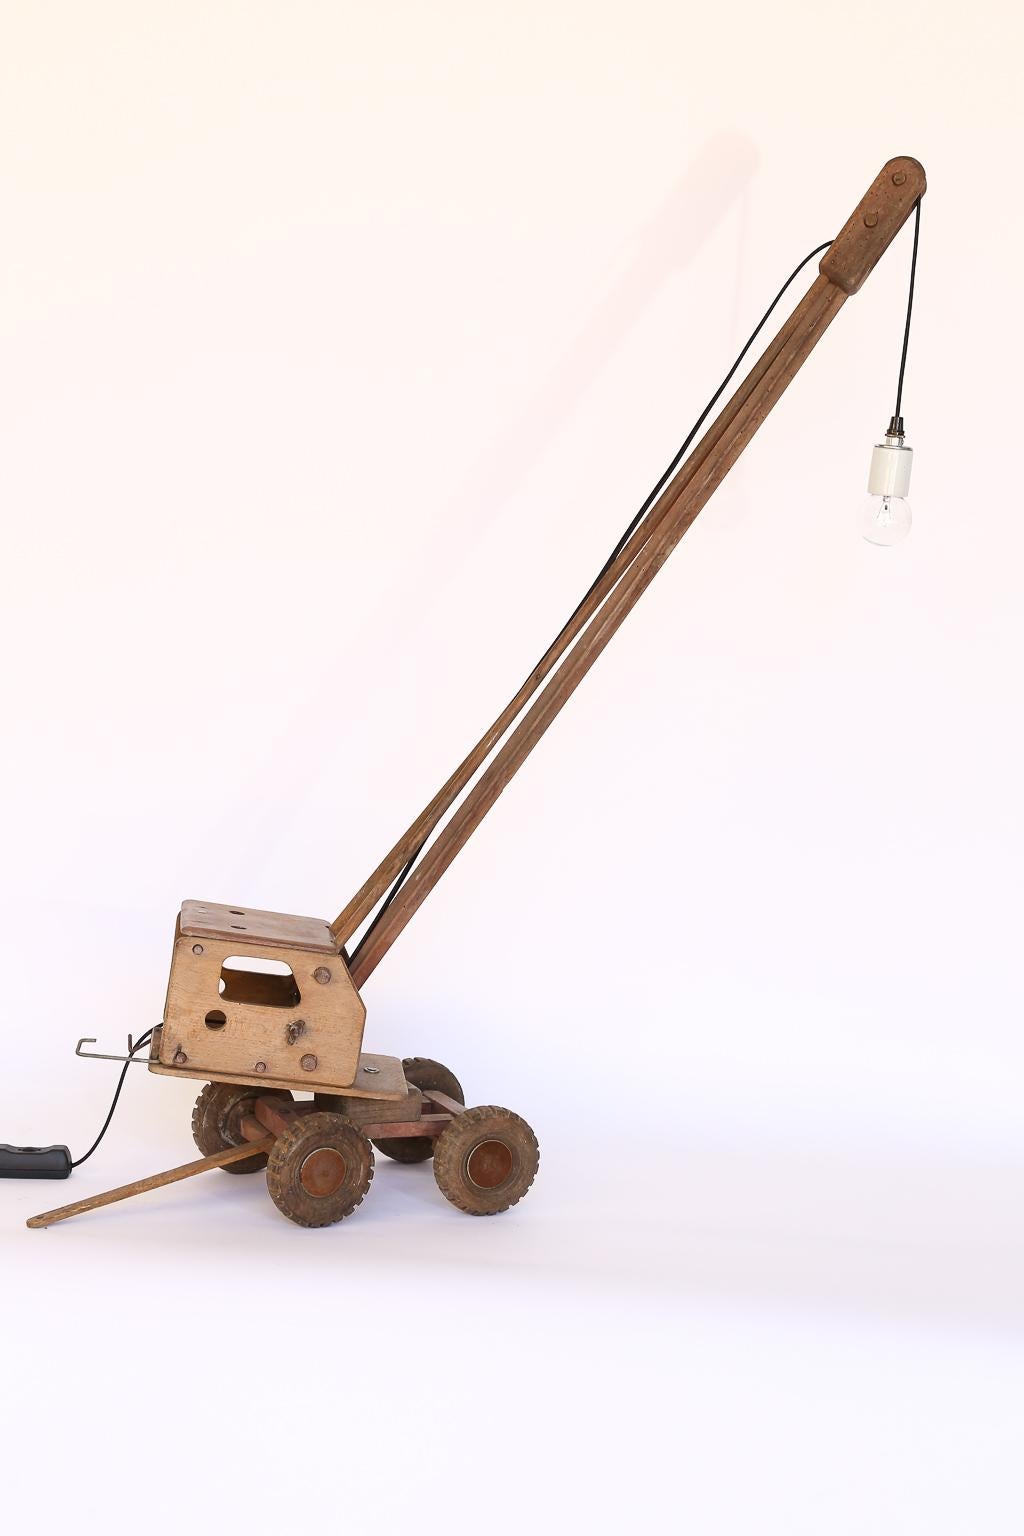 20th Century Vintage Wood Toy Crane Repurposed as a Table Lamp